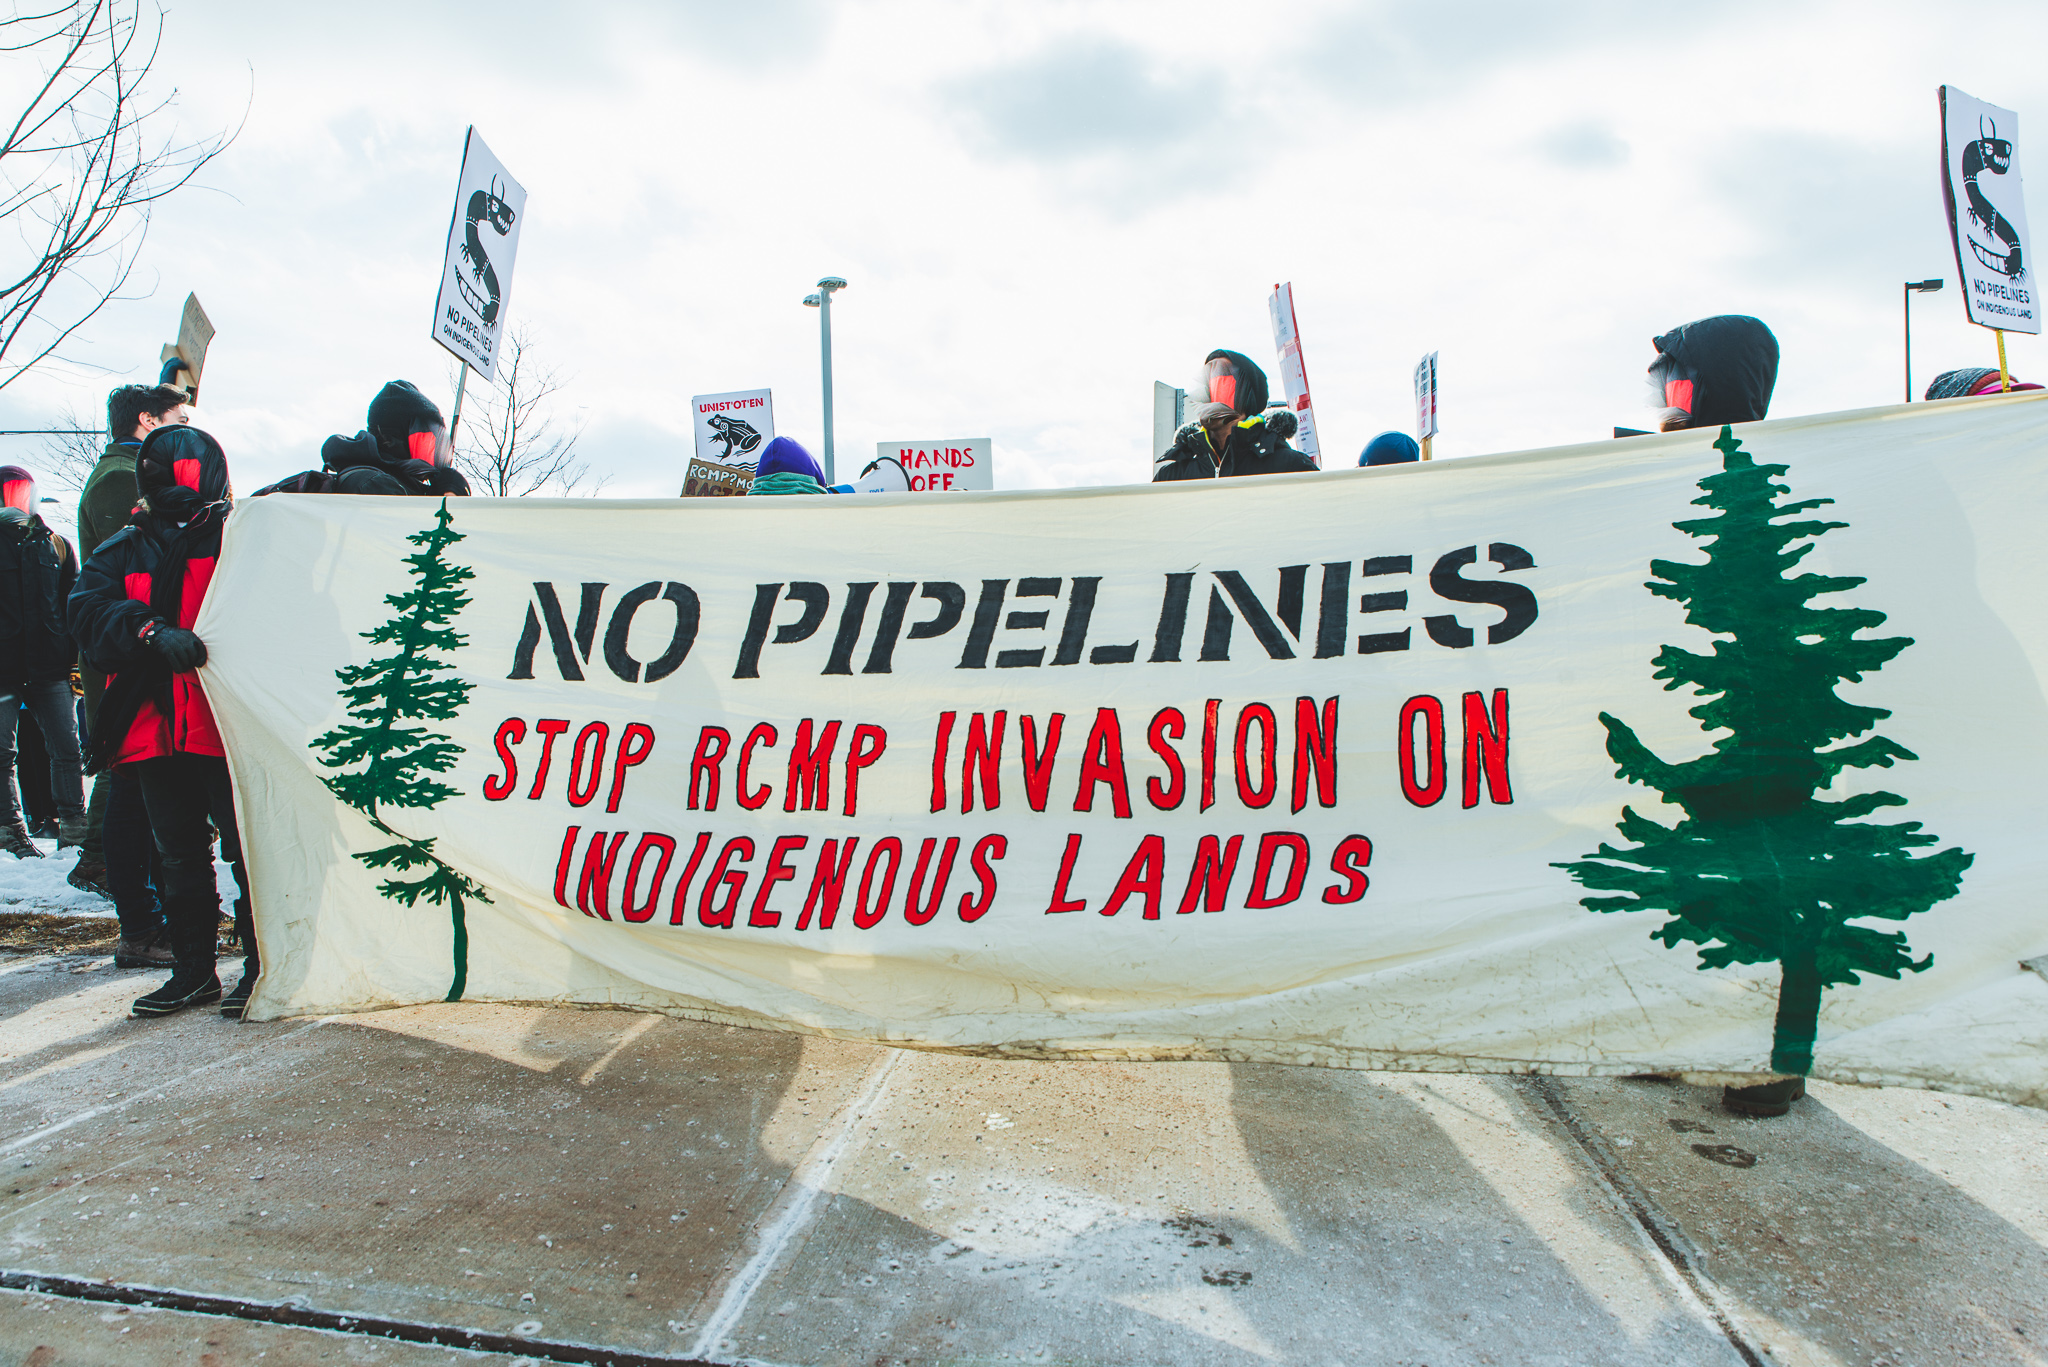 Protesters hold up a banner that says "No Pipelines: Stop RCMP Invasion on Indigenous Lands"